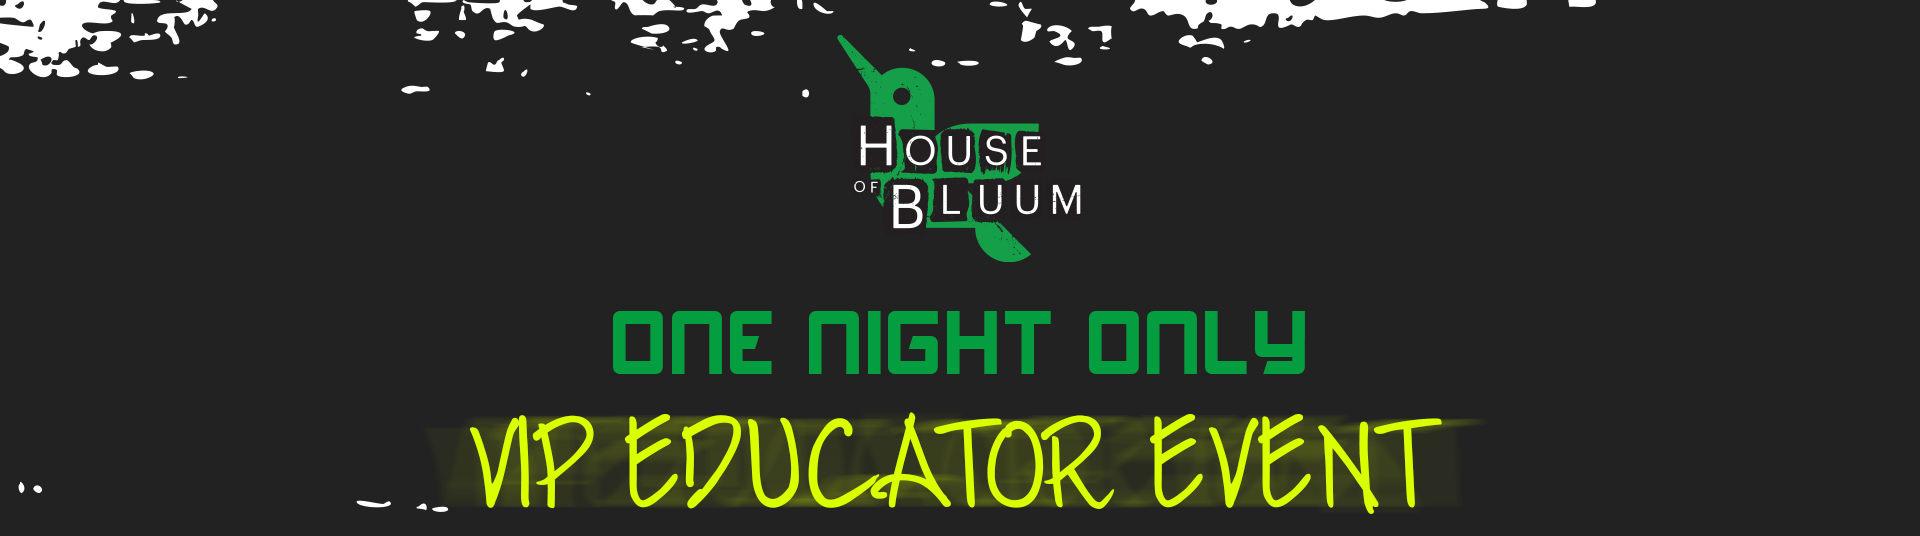 House of Bluum, one night only, Vip Educator Event